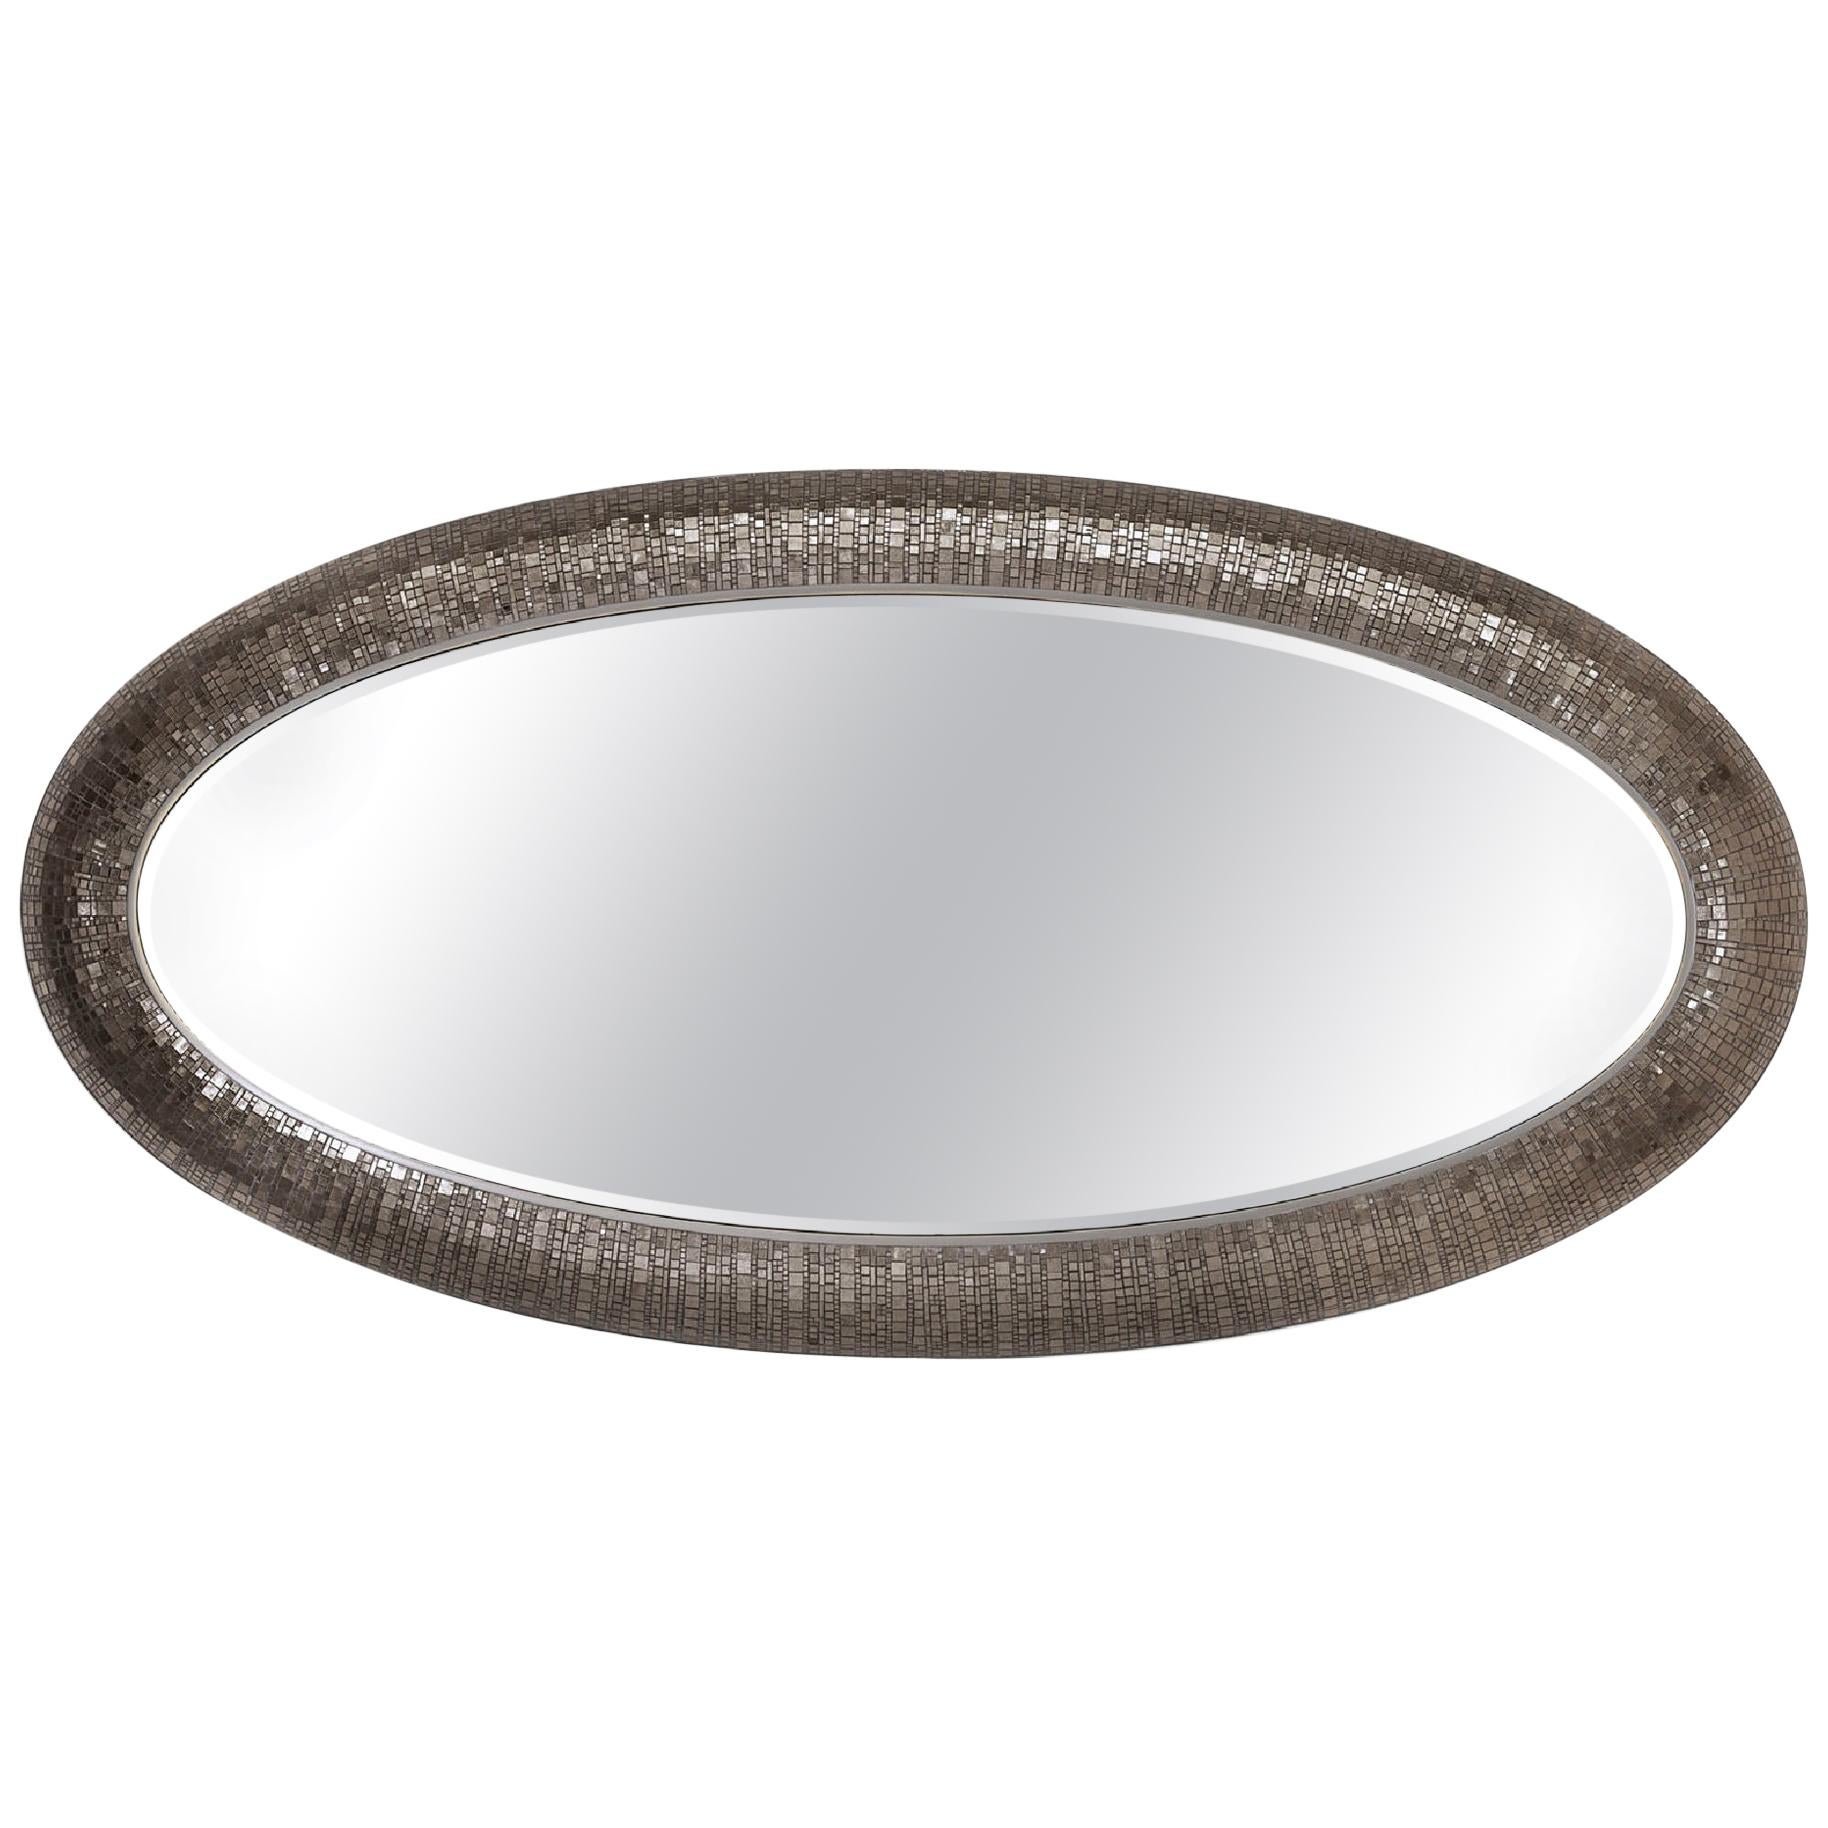 Mirror Bronze or Silver Finish and Decorated with Mosaic, LED Backlighting